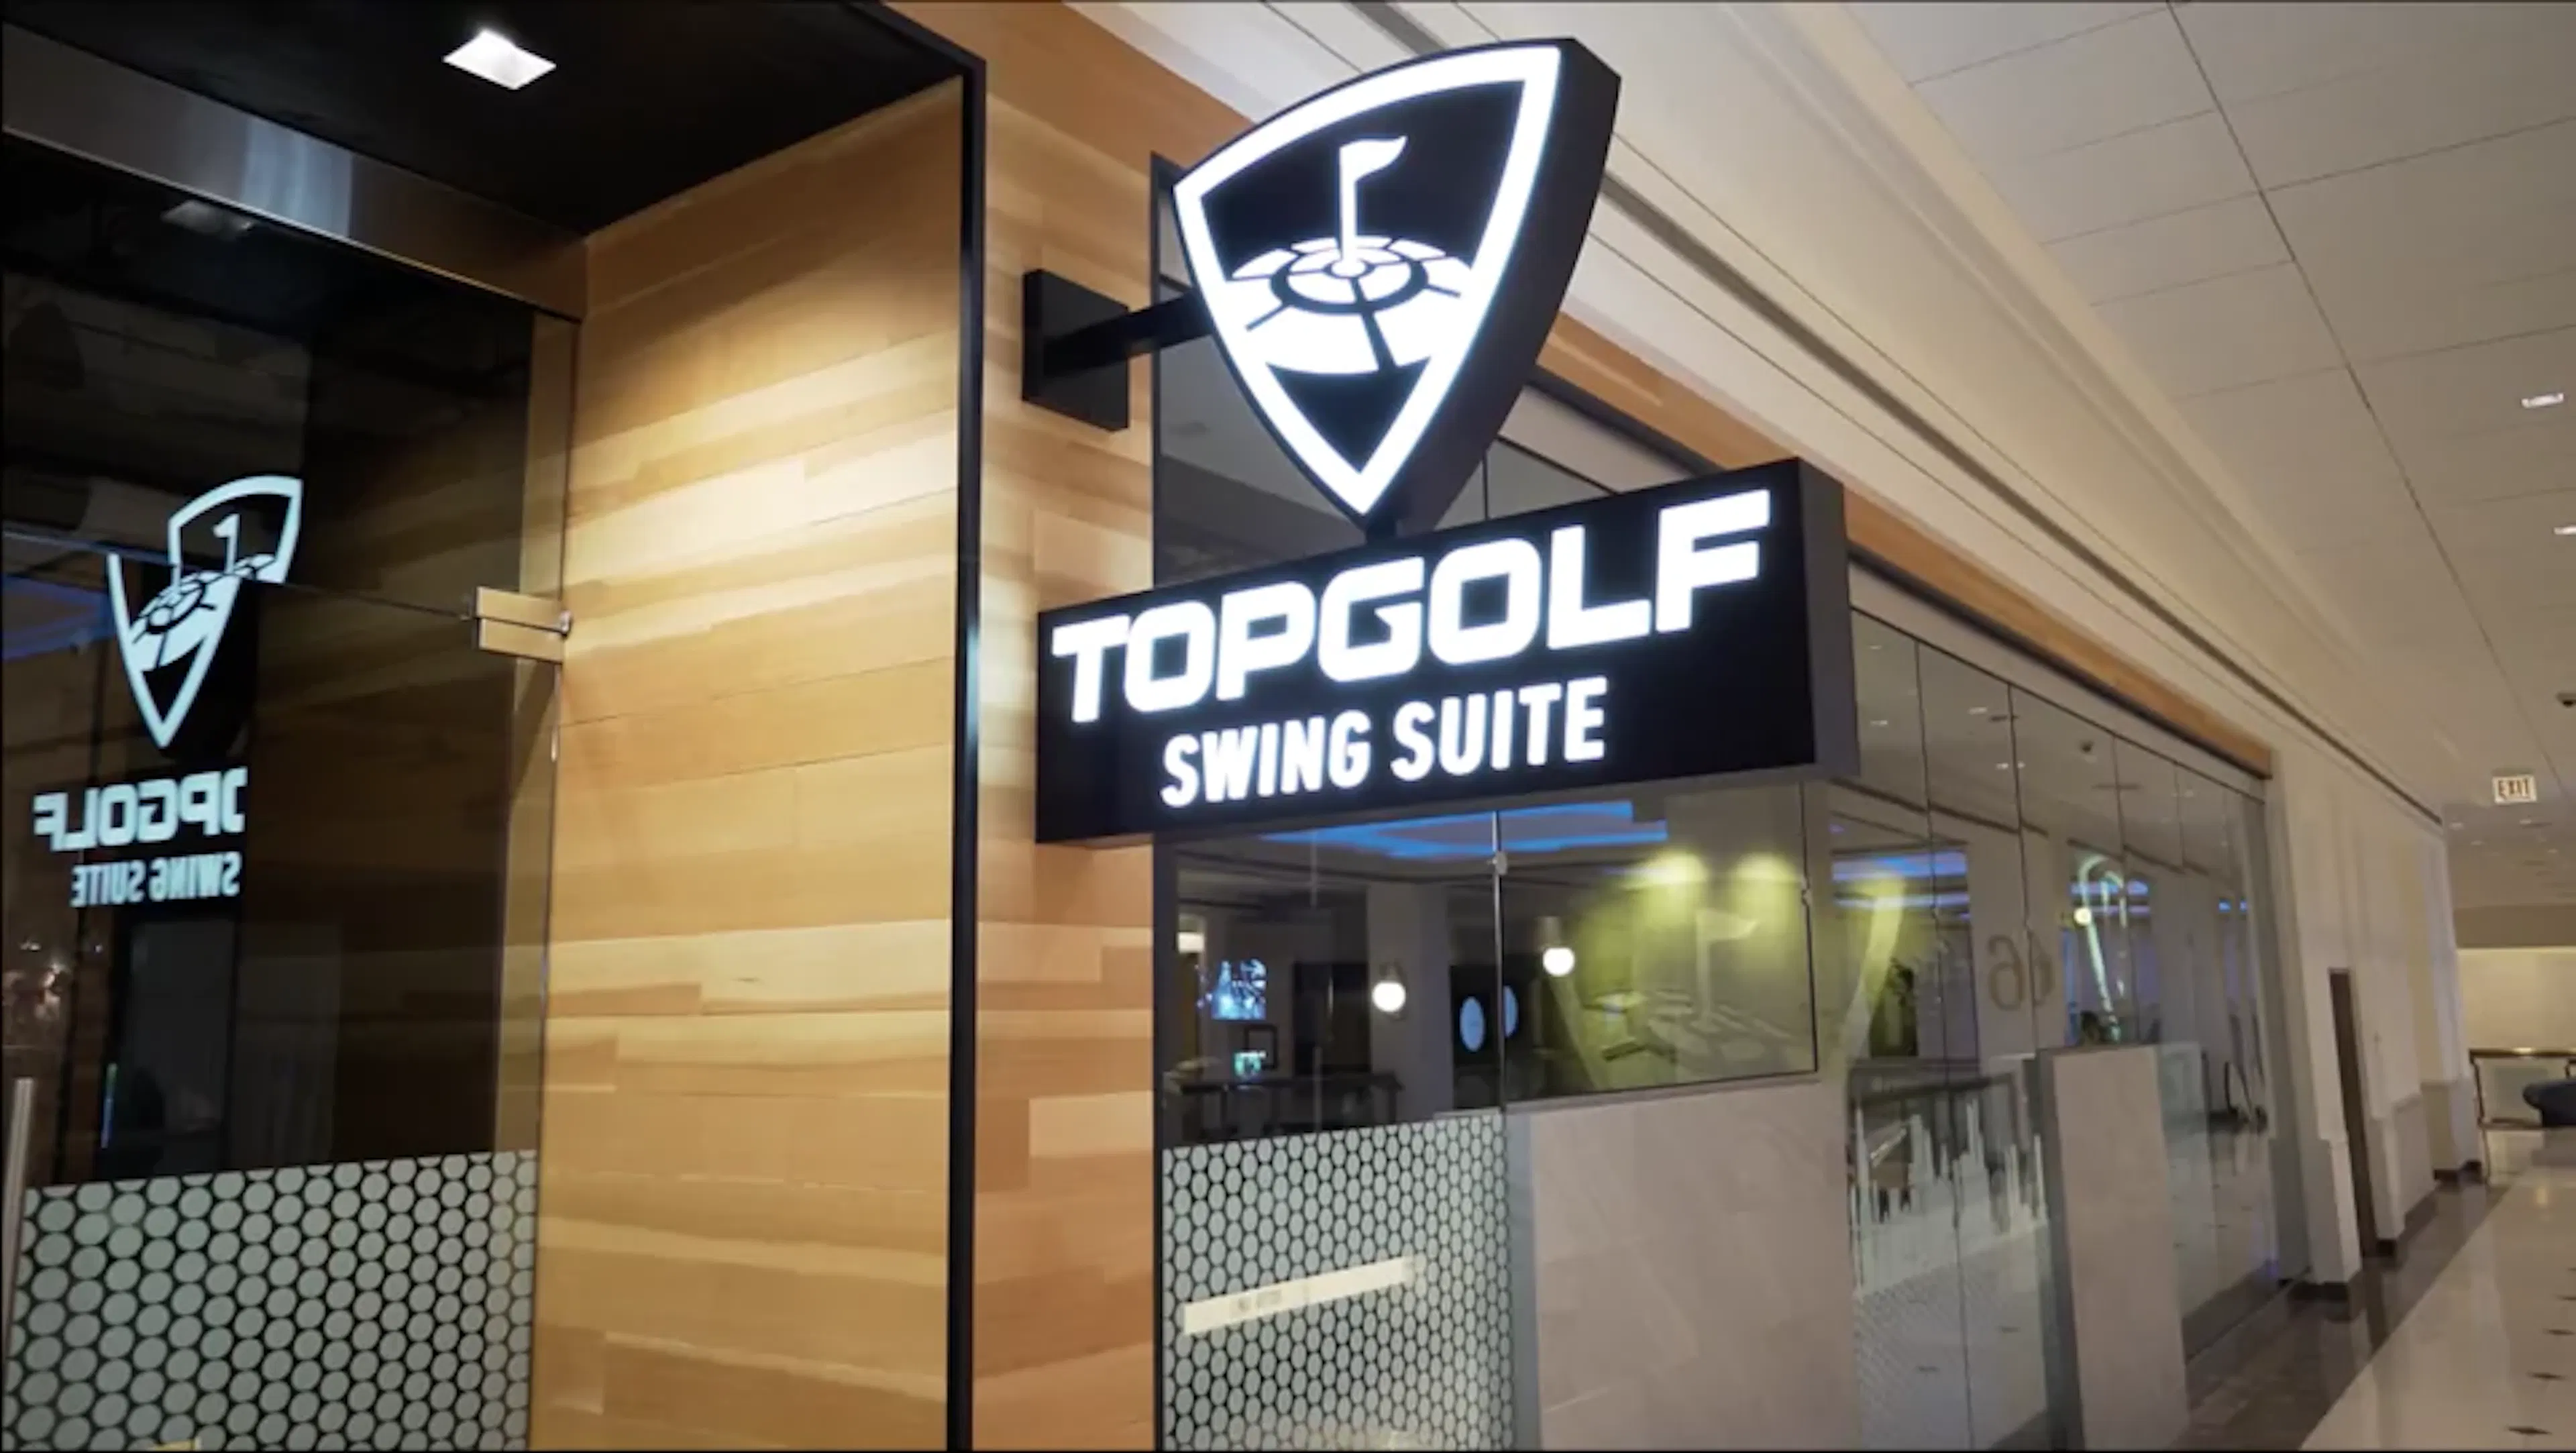 topgolf swing suite at flying squirrel